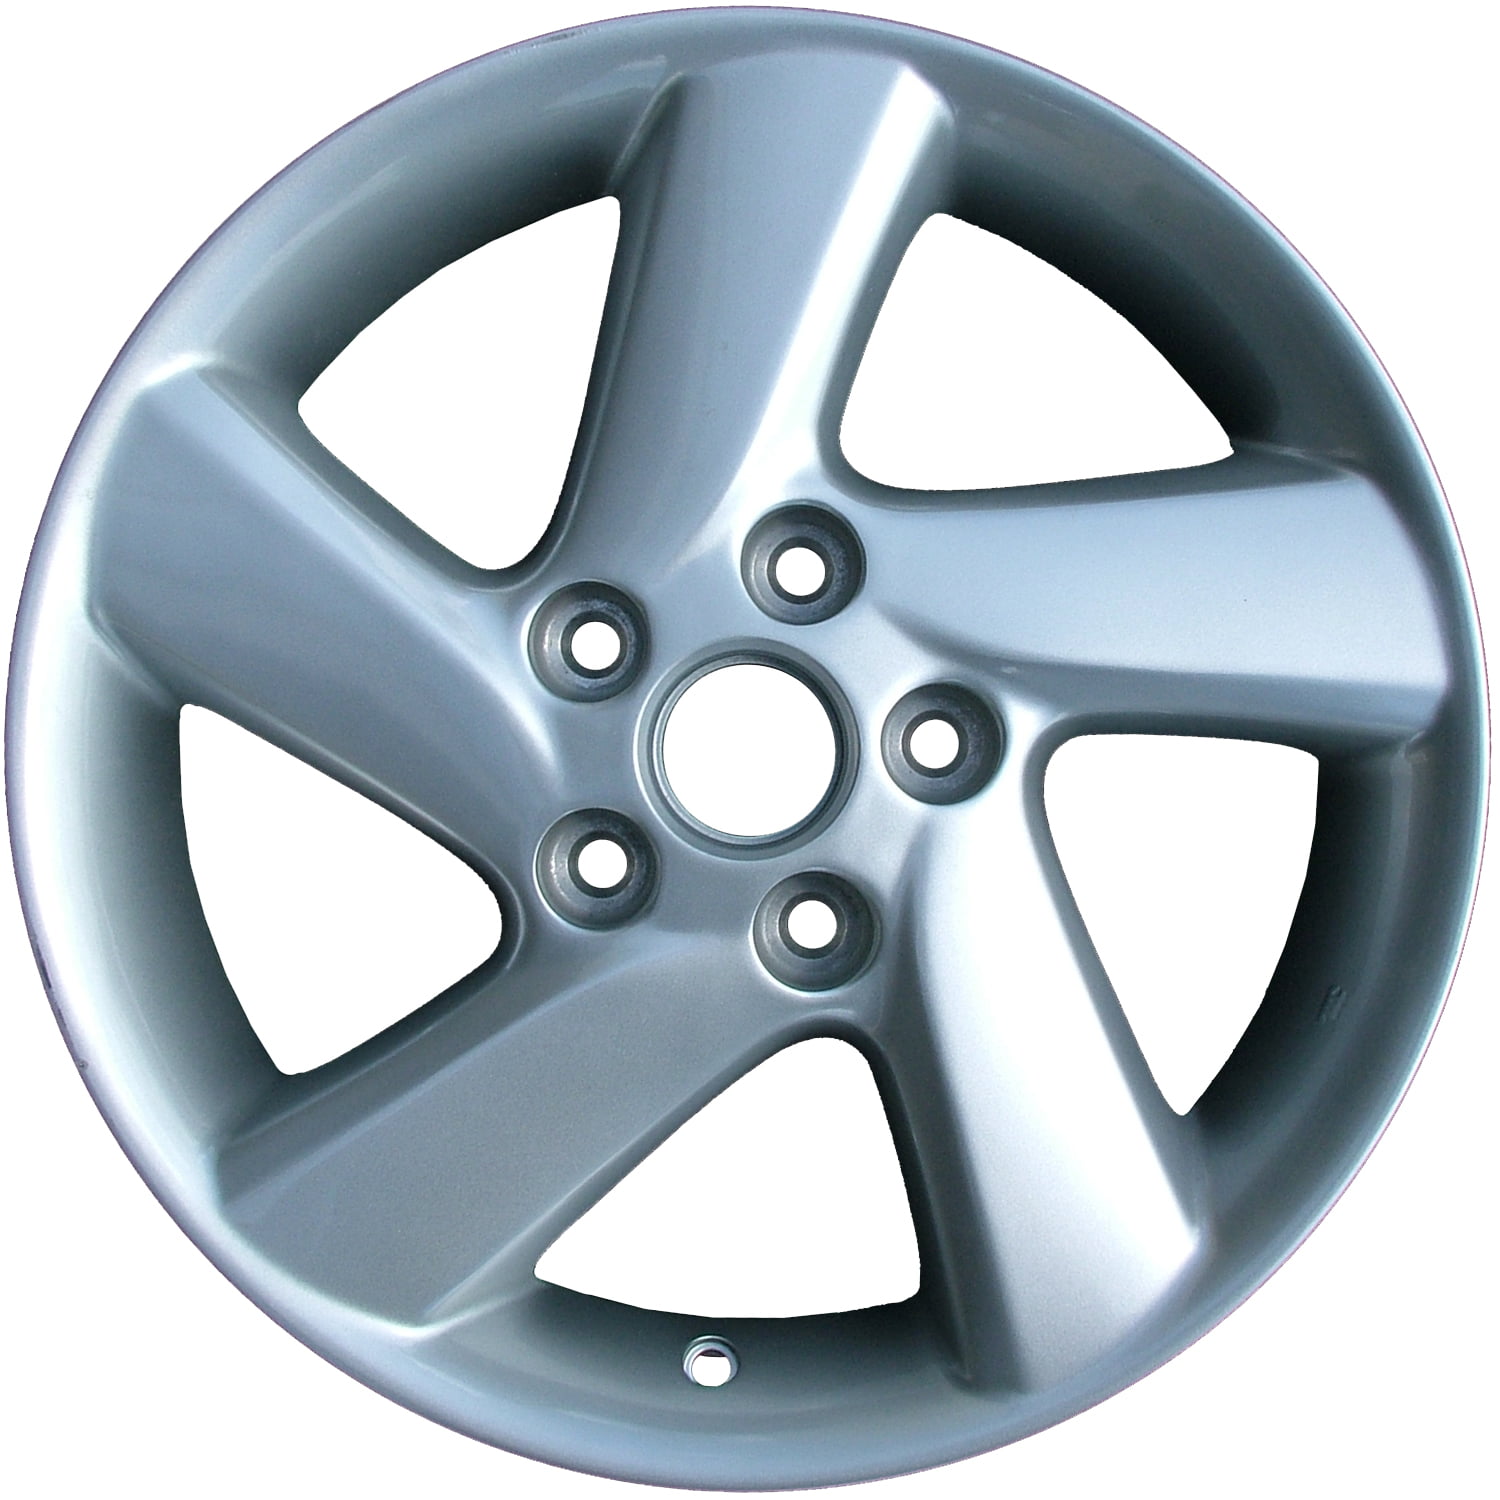 16 X 7 Reconditioned OEM Aluminum Alloy Wheel, Silver, Fits 2003-2004 Mazda  6